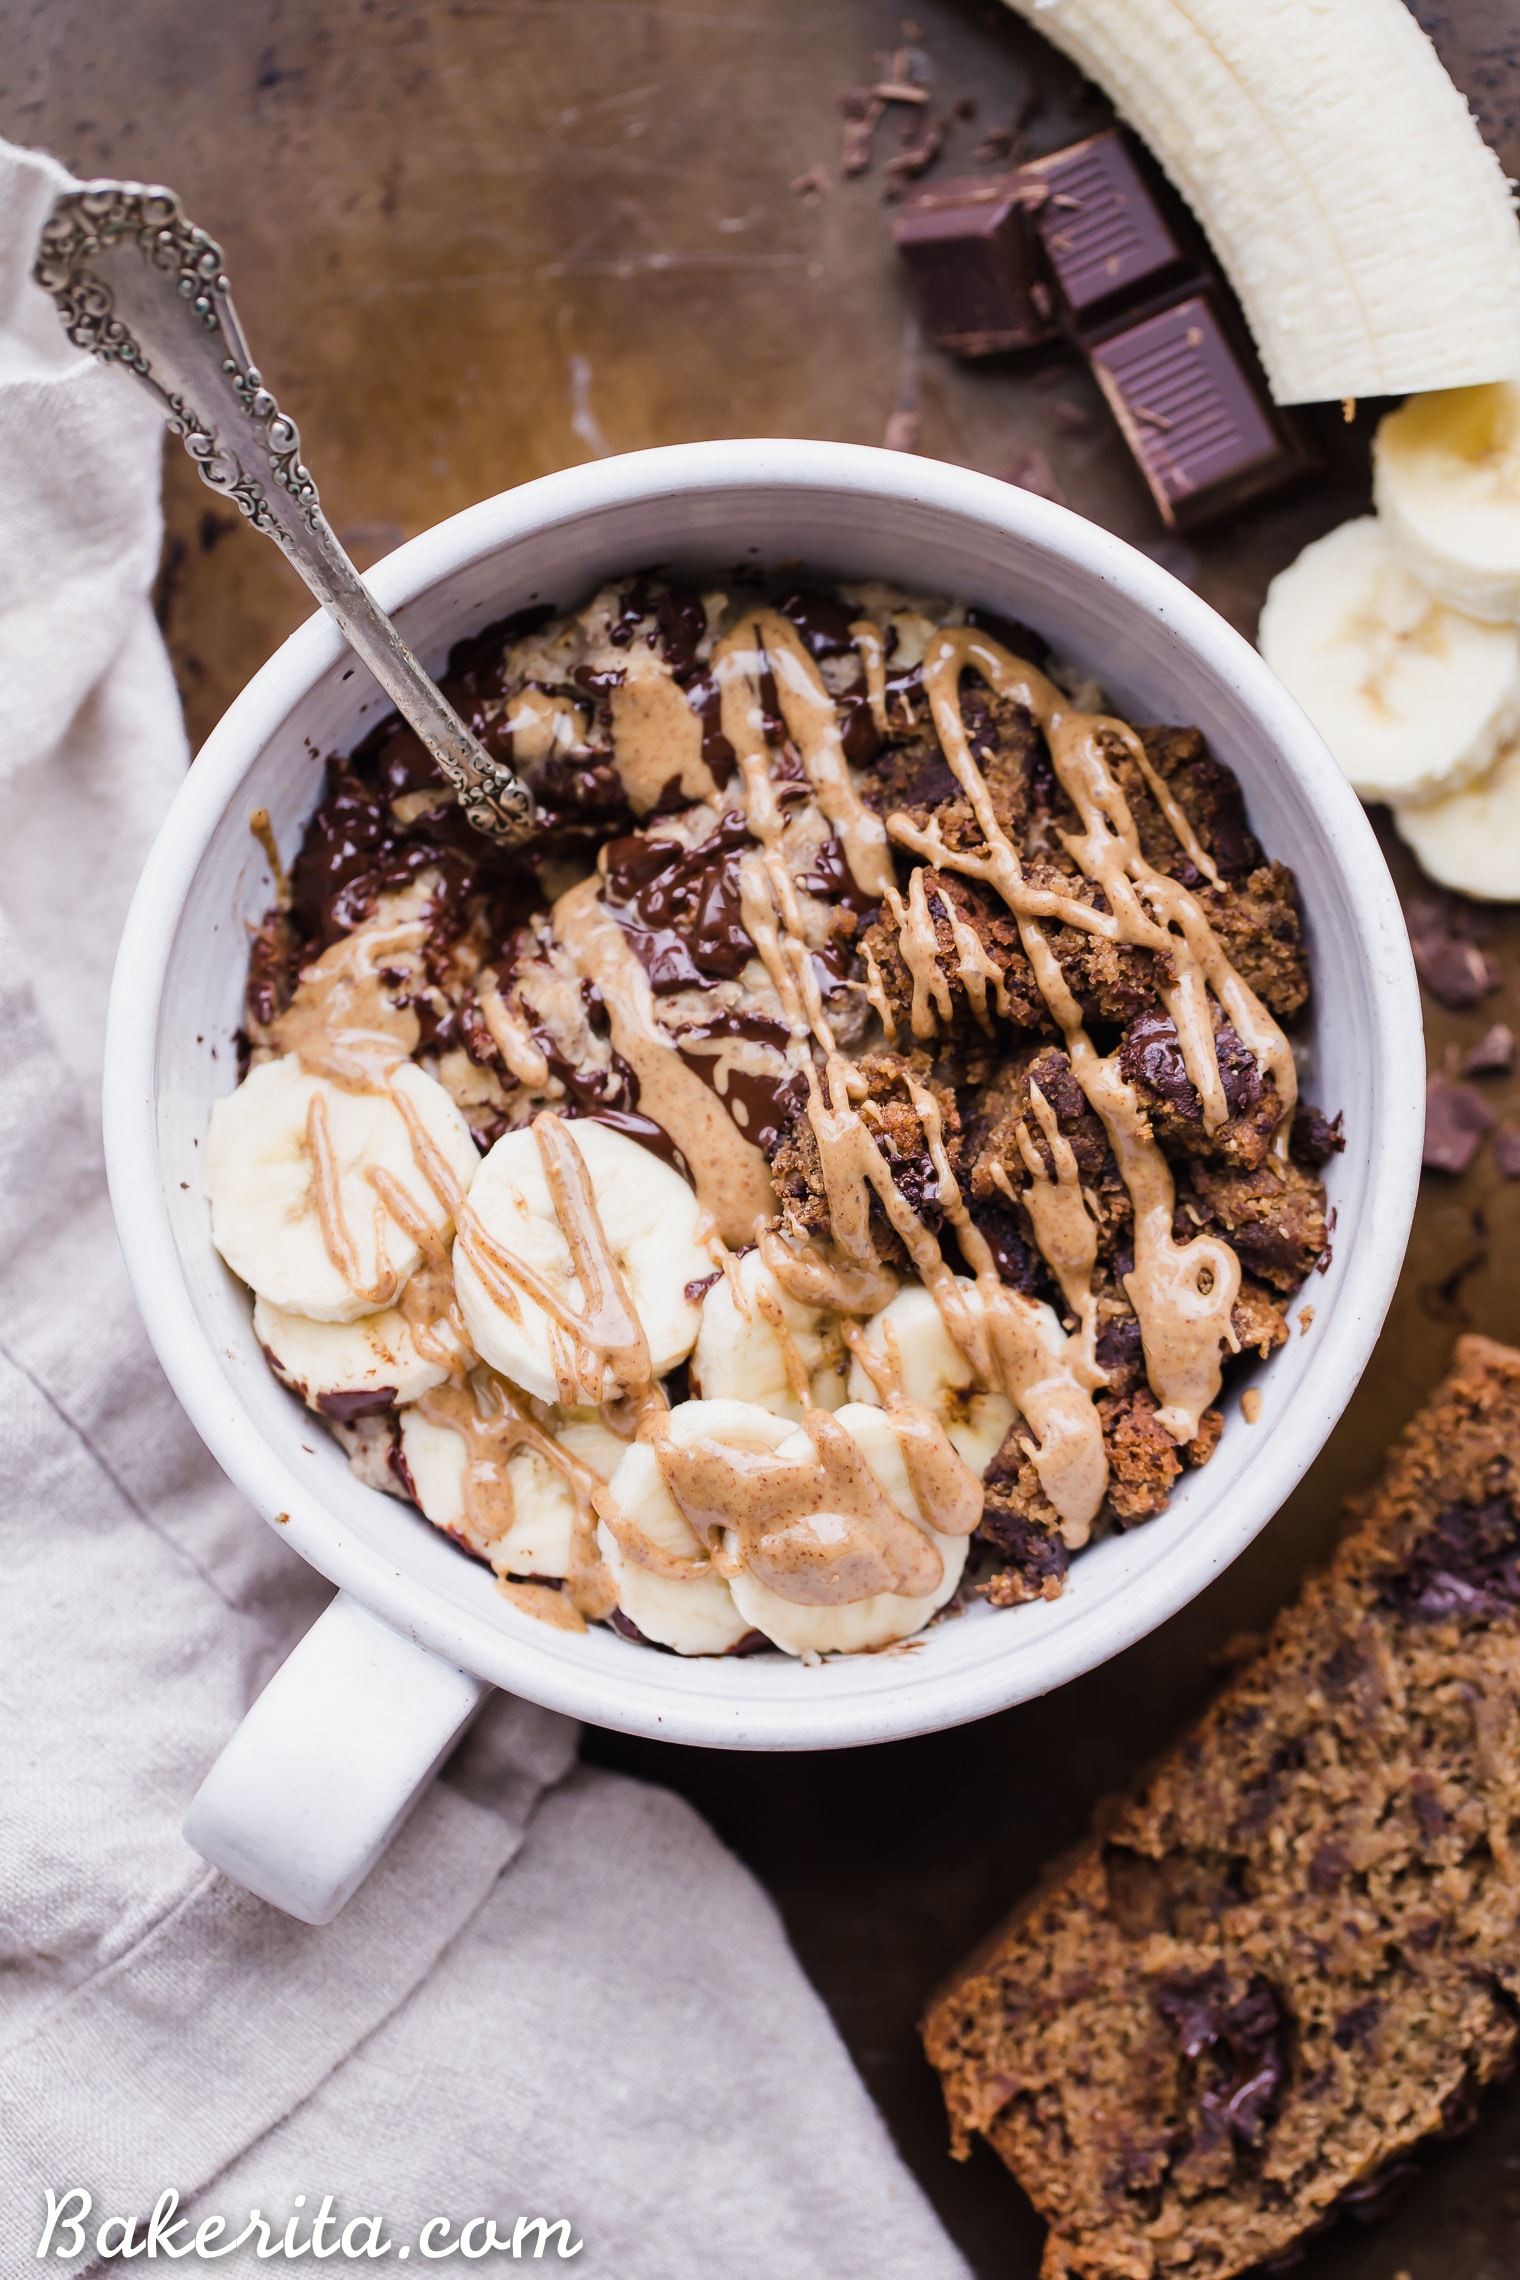 This Banana Bread Oatmeal is sweetened with JUST a ripe banana - no additional sweetener needed! It's loaded with cinnamon and tastes like a creamy version of banana bread - what more could you want?! This easy breakfast recipe is gluten-free and vegan, too.